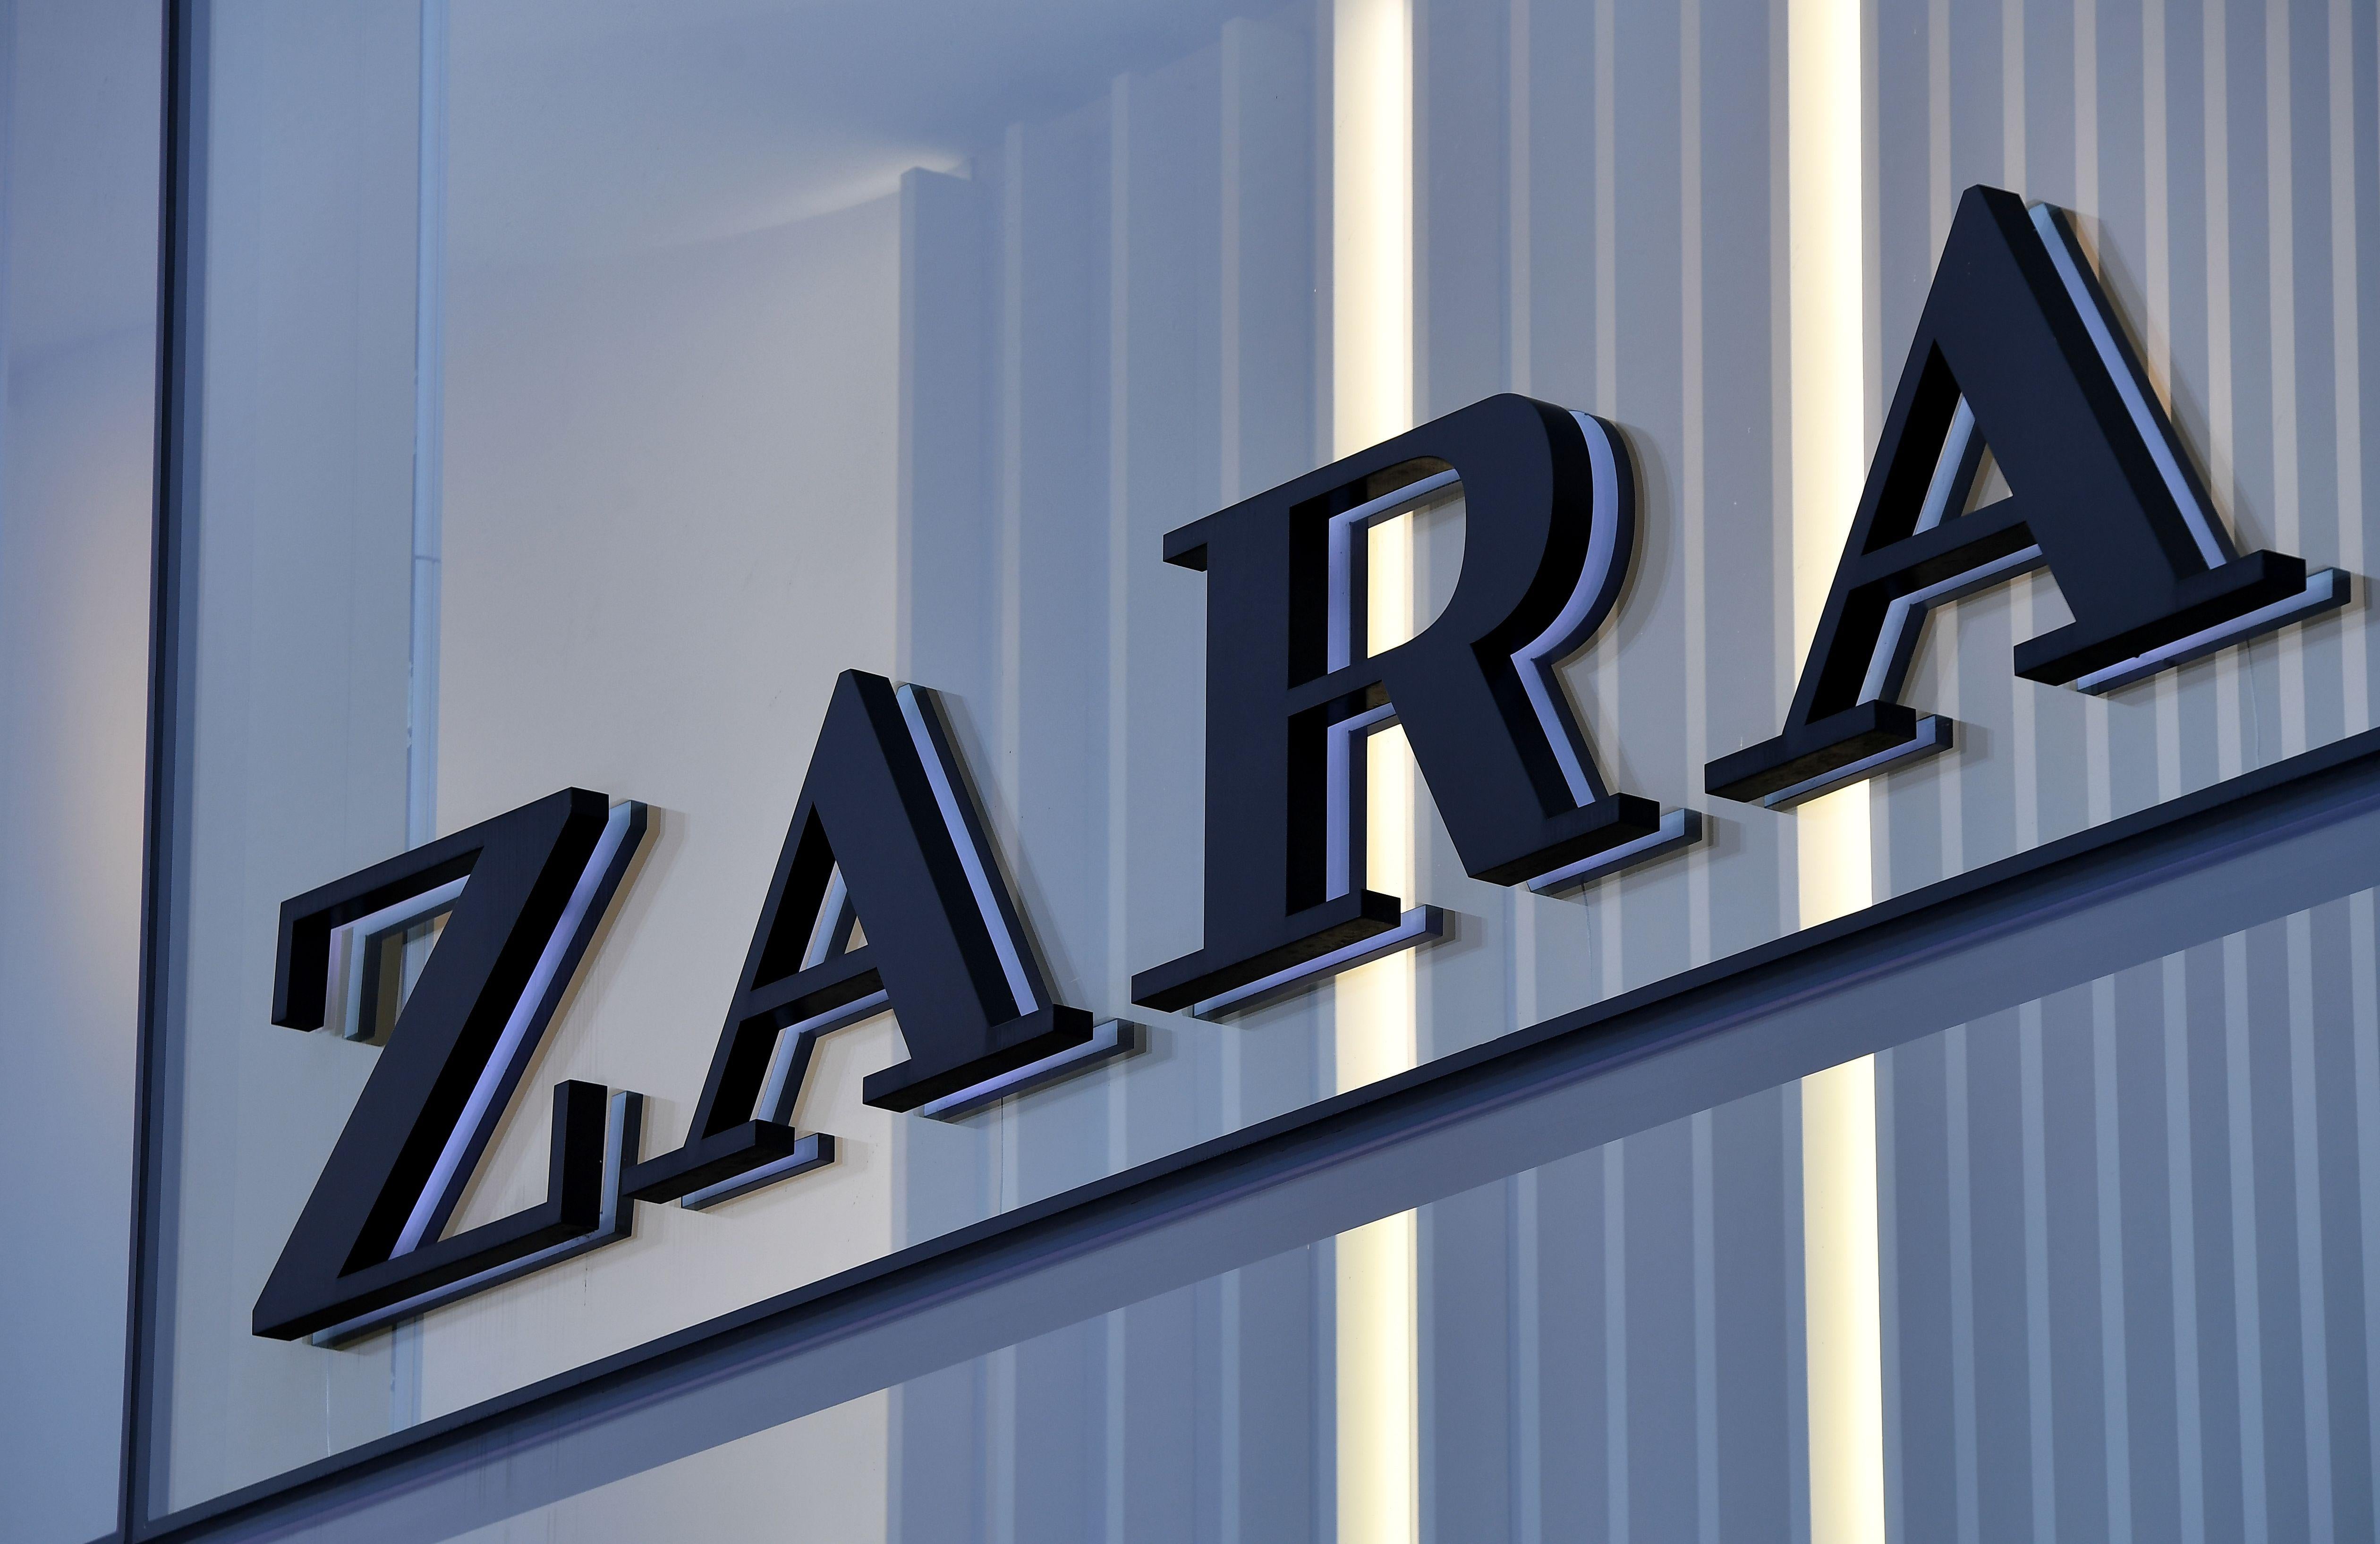 zara ethical issues